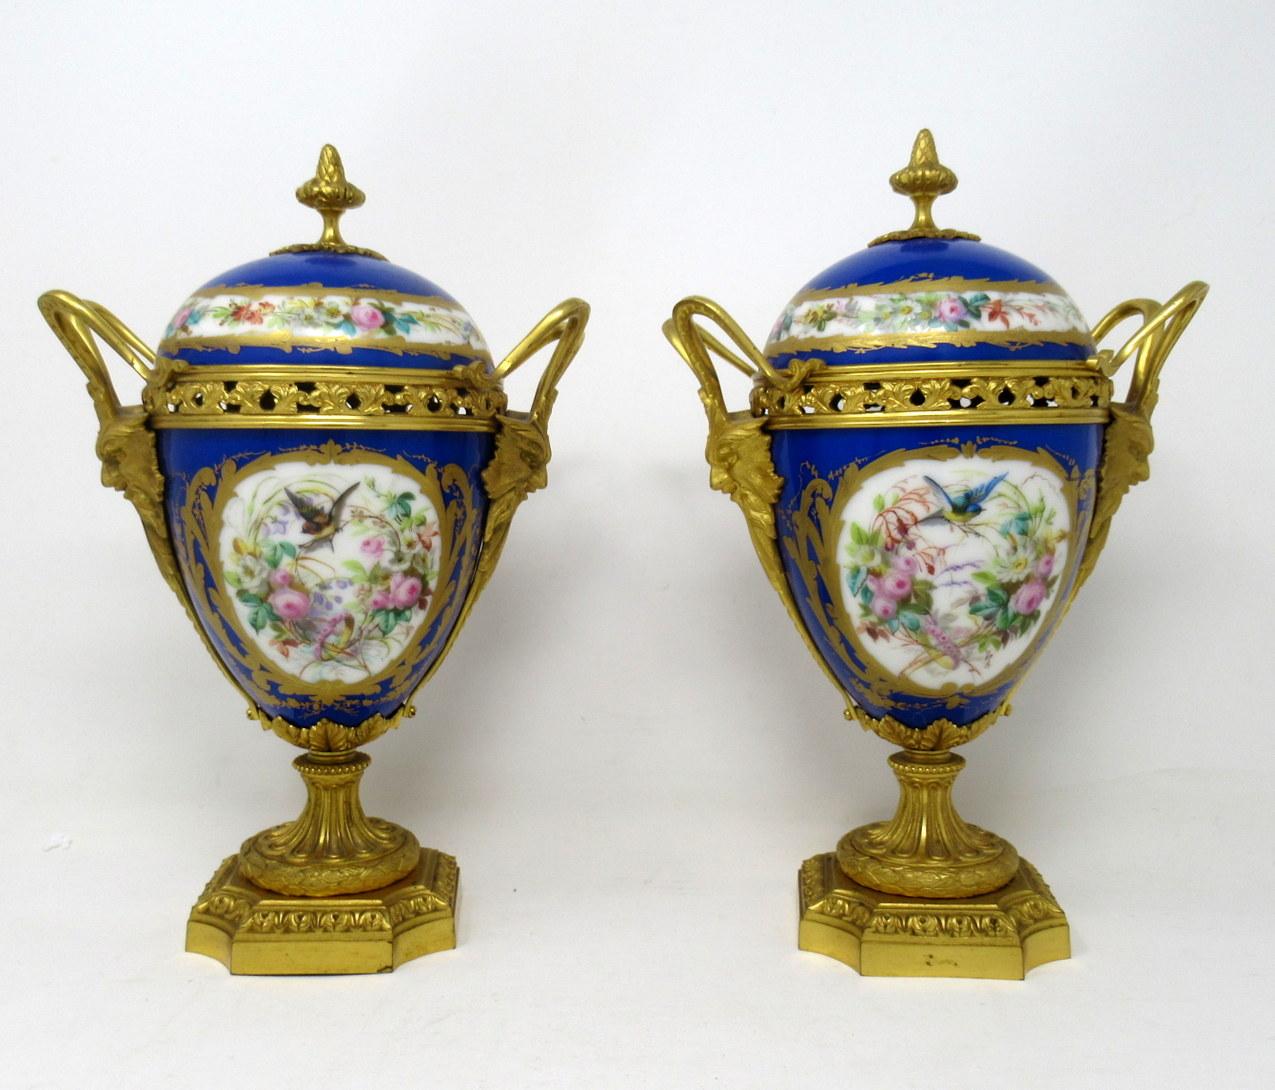 Stunning pair of French Sèvres soft paste porcelain and ormolu twin handle table or mantel (fireplace) urn of traditional bulbous form and of outstanding quality, raised on a square stepped base with canted corners. 

The twin handles exquisitely